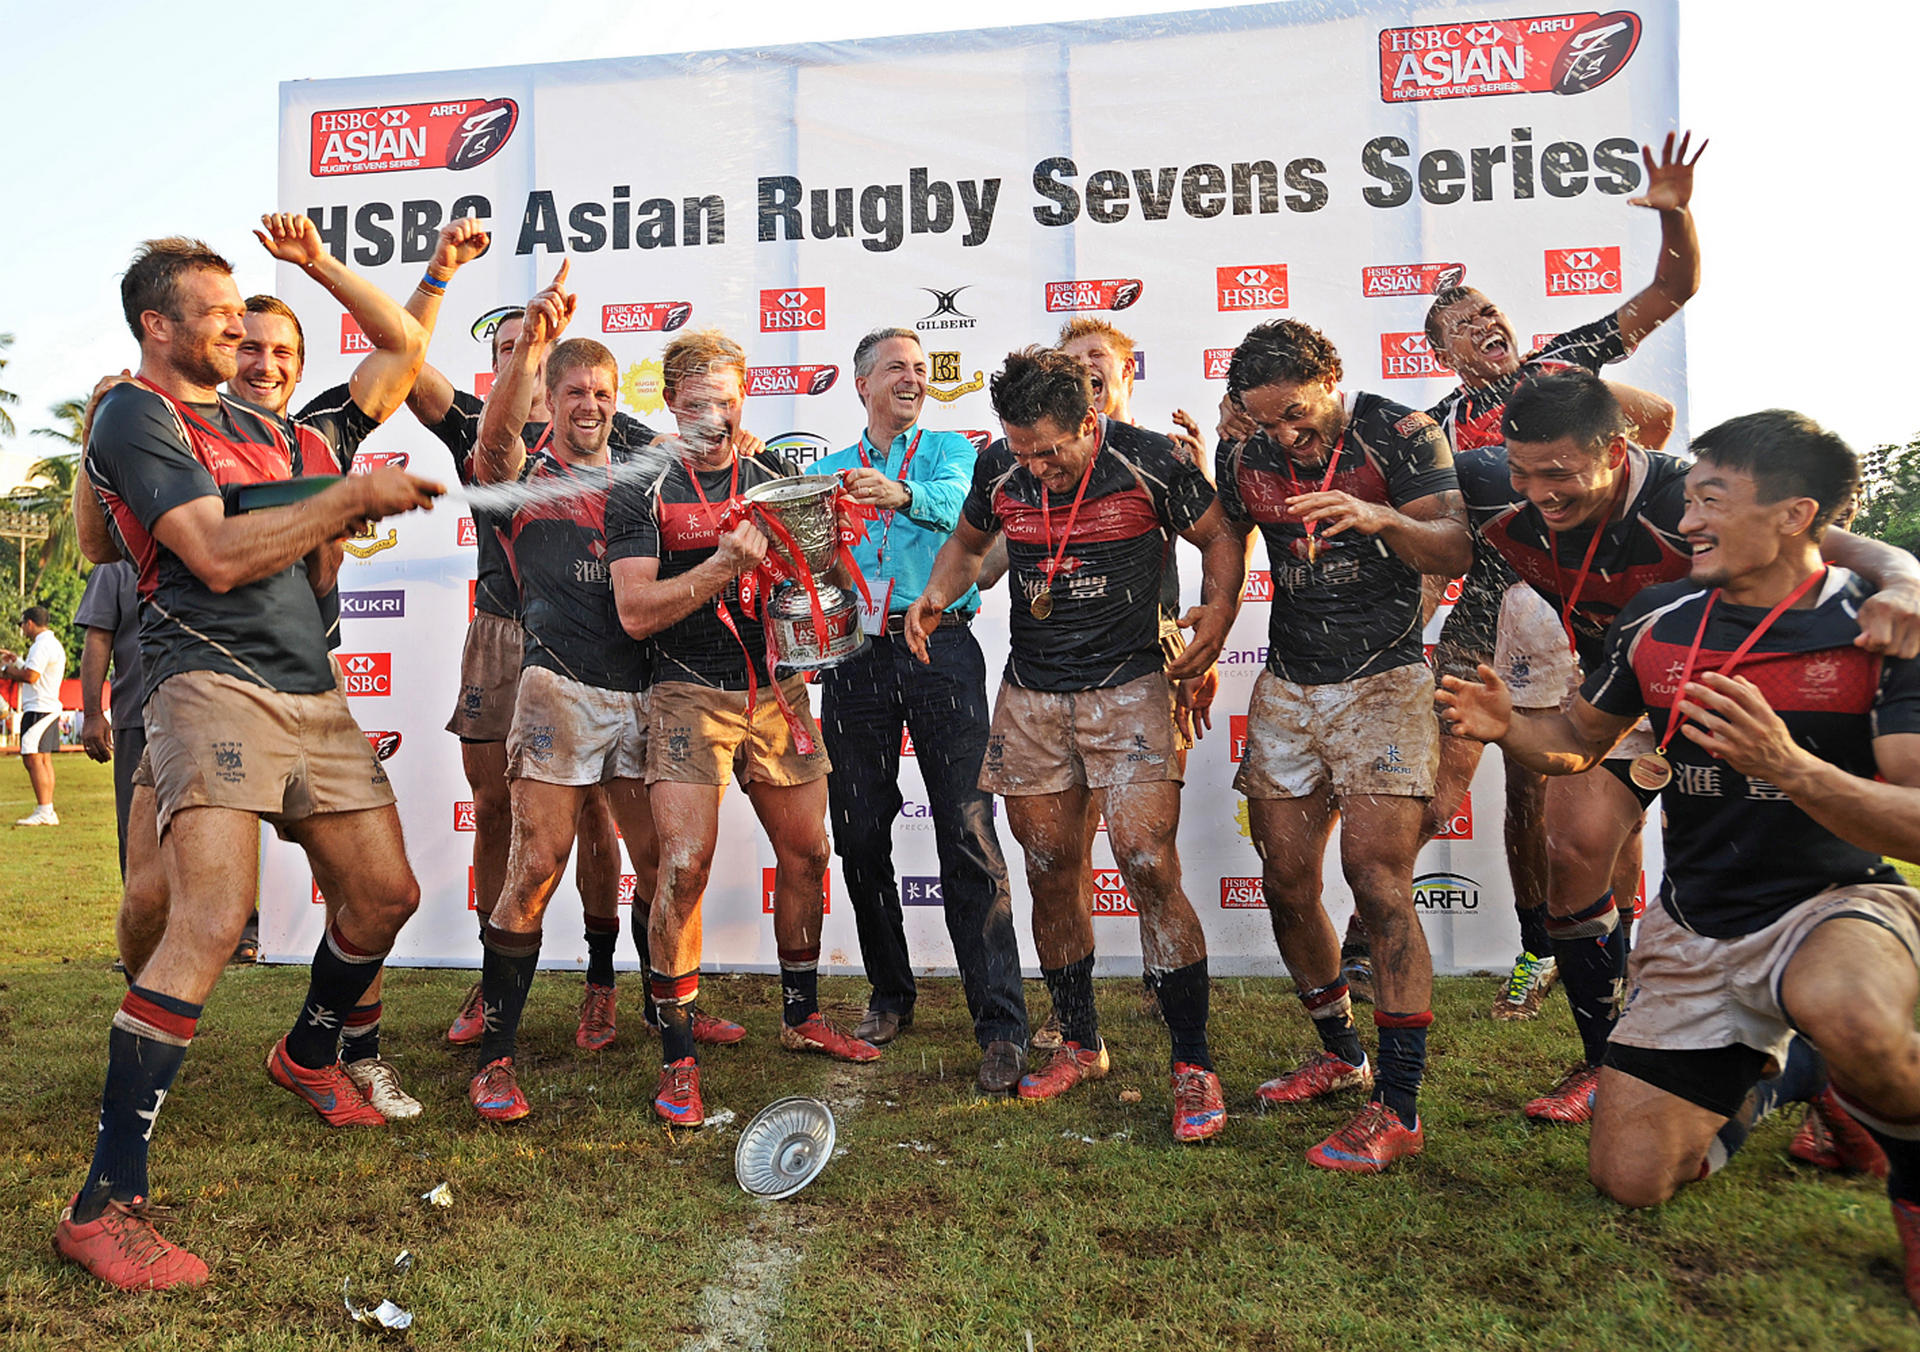 Hong Kong hope to repeat their Mumbai tournament victory in the last leg of the Asian Sevens Series in Singapore. Photo: SCMP Pictures